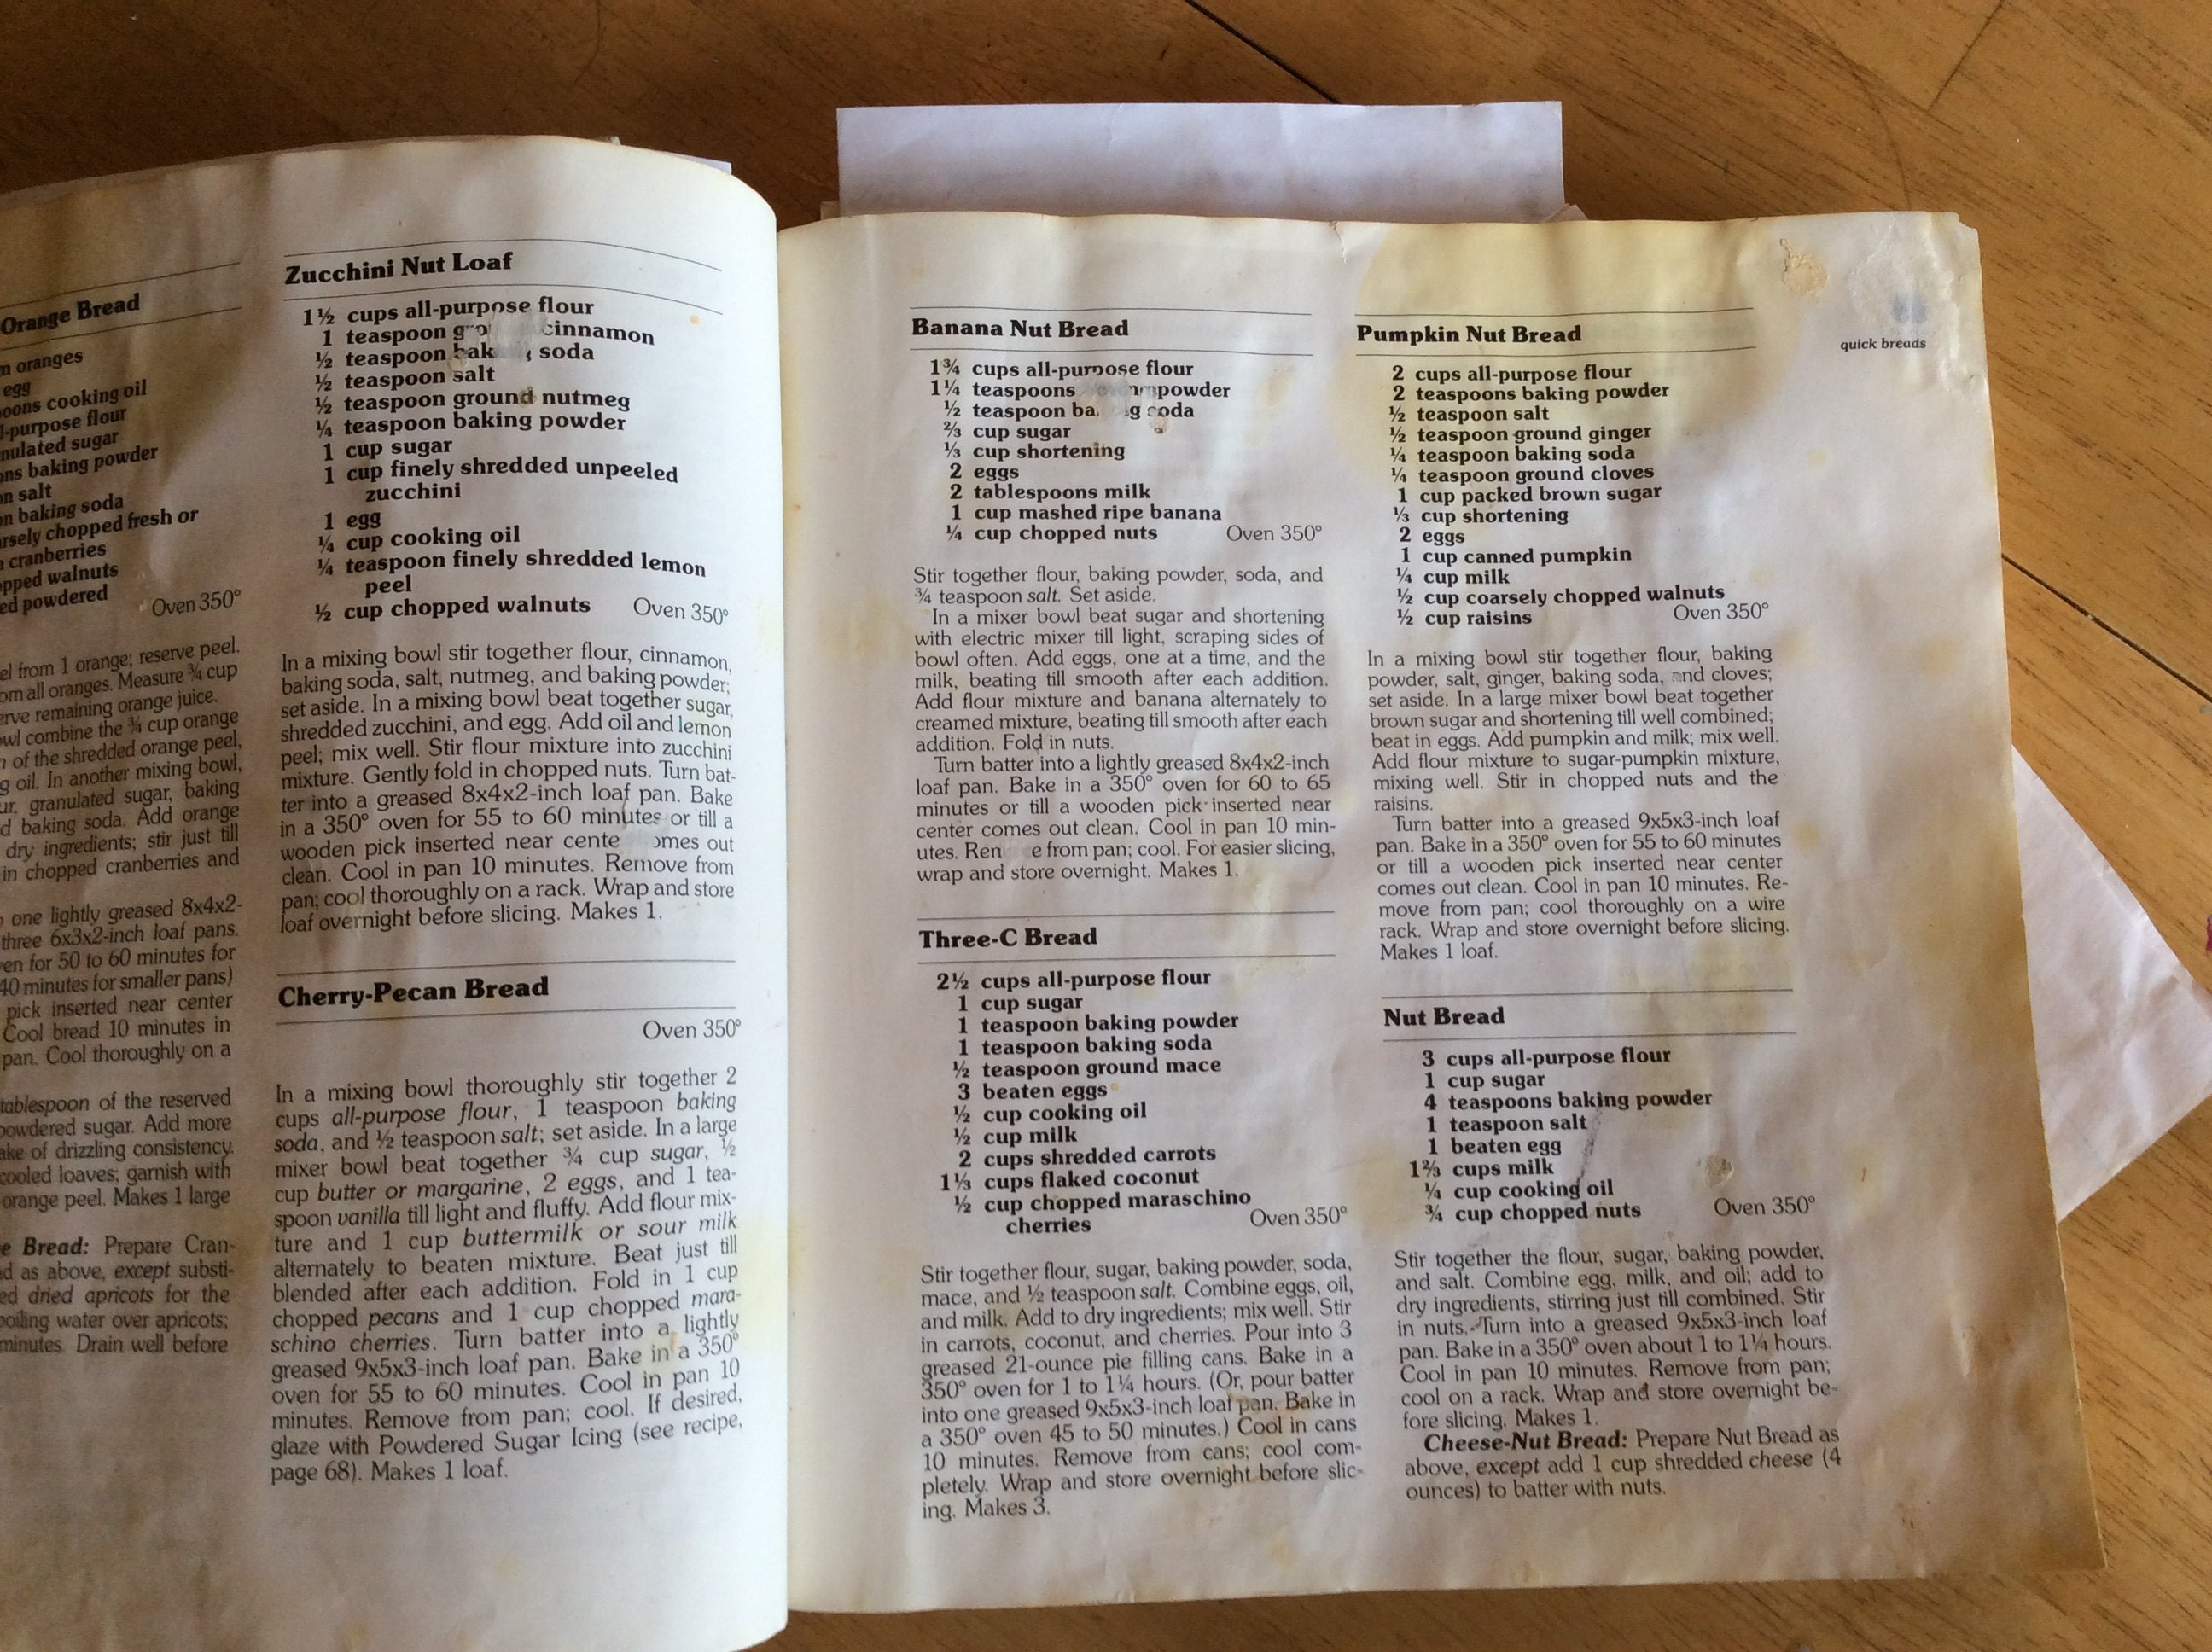 Stiff and stained pages in old recipe book